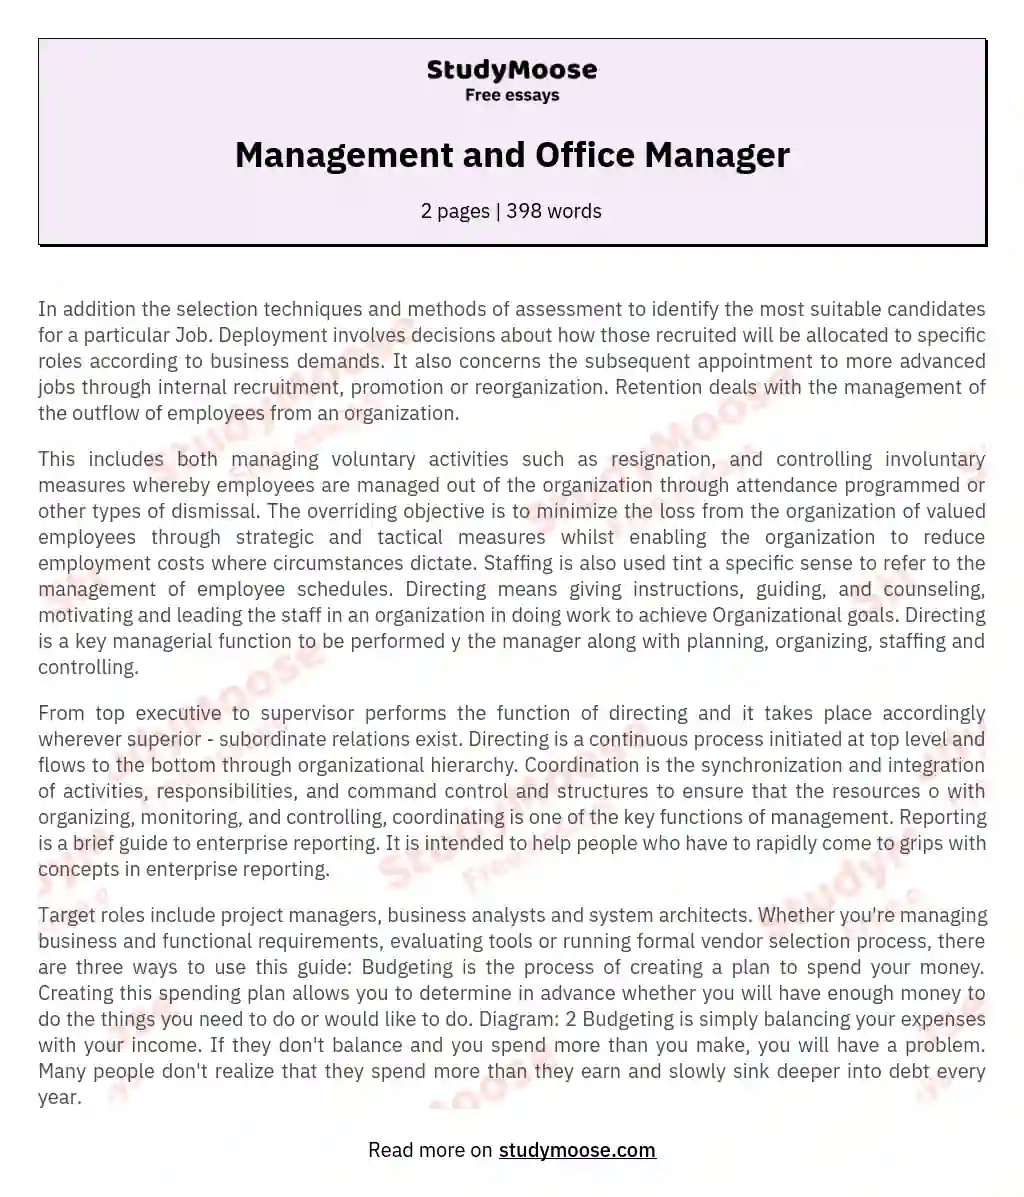 Management and Office Manager essay